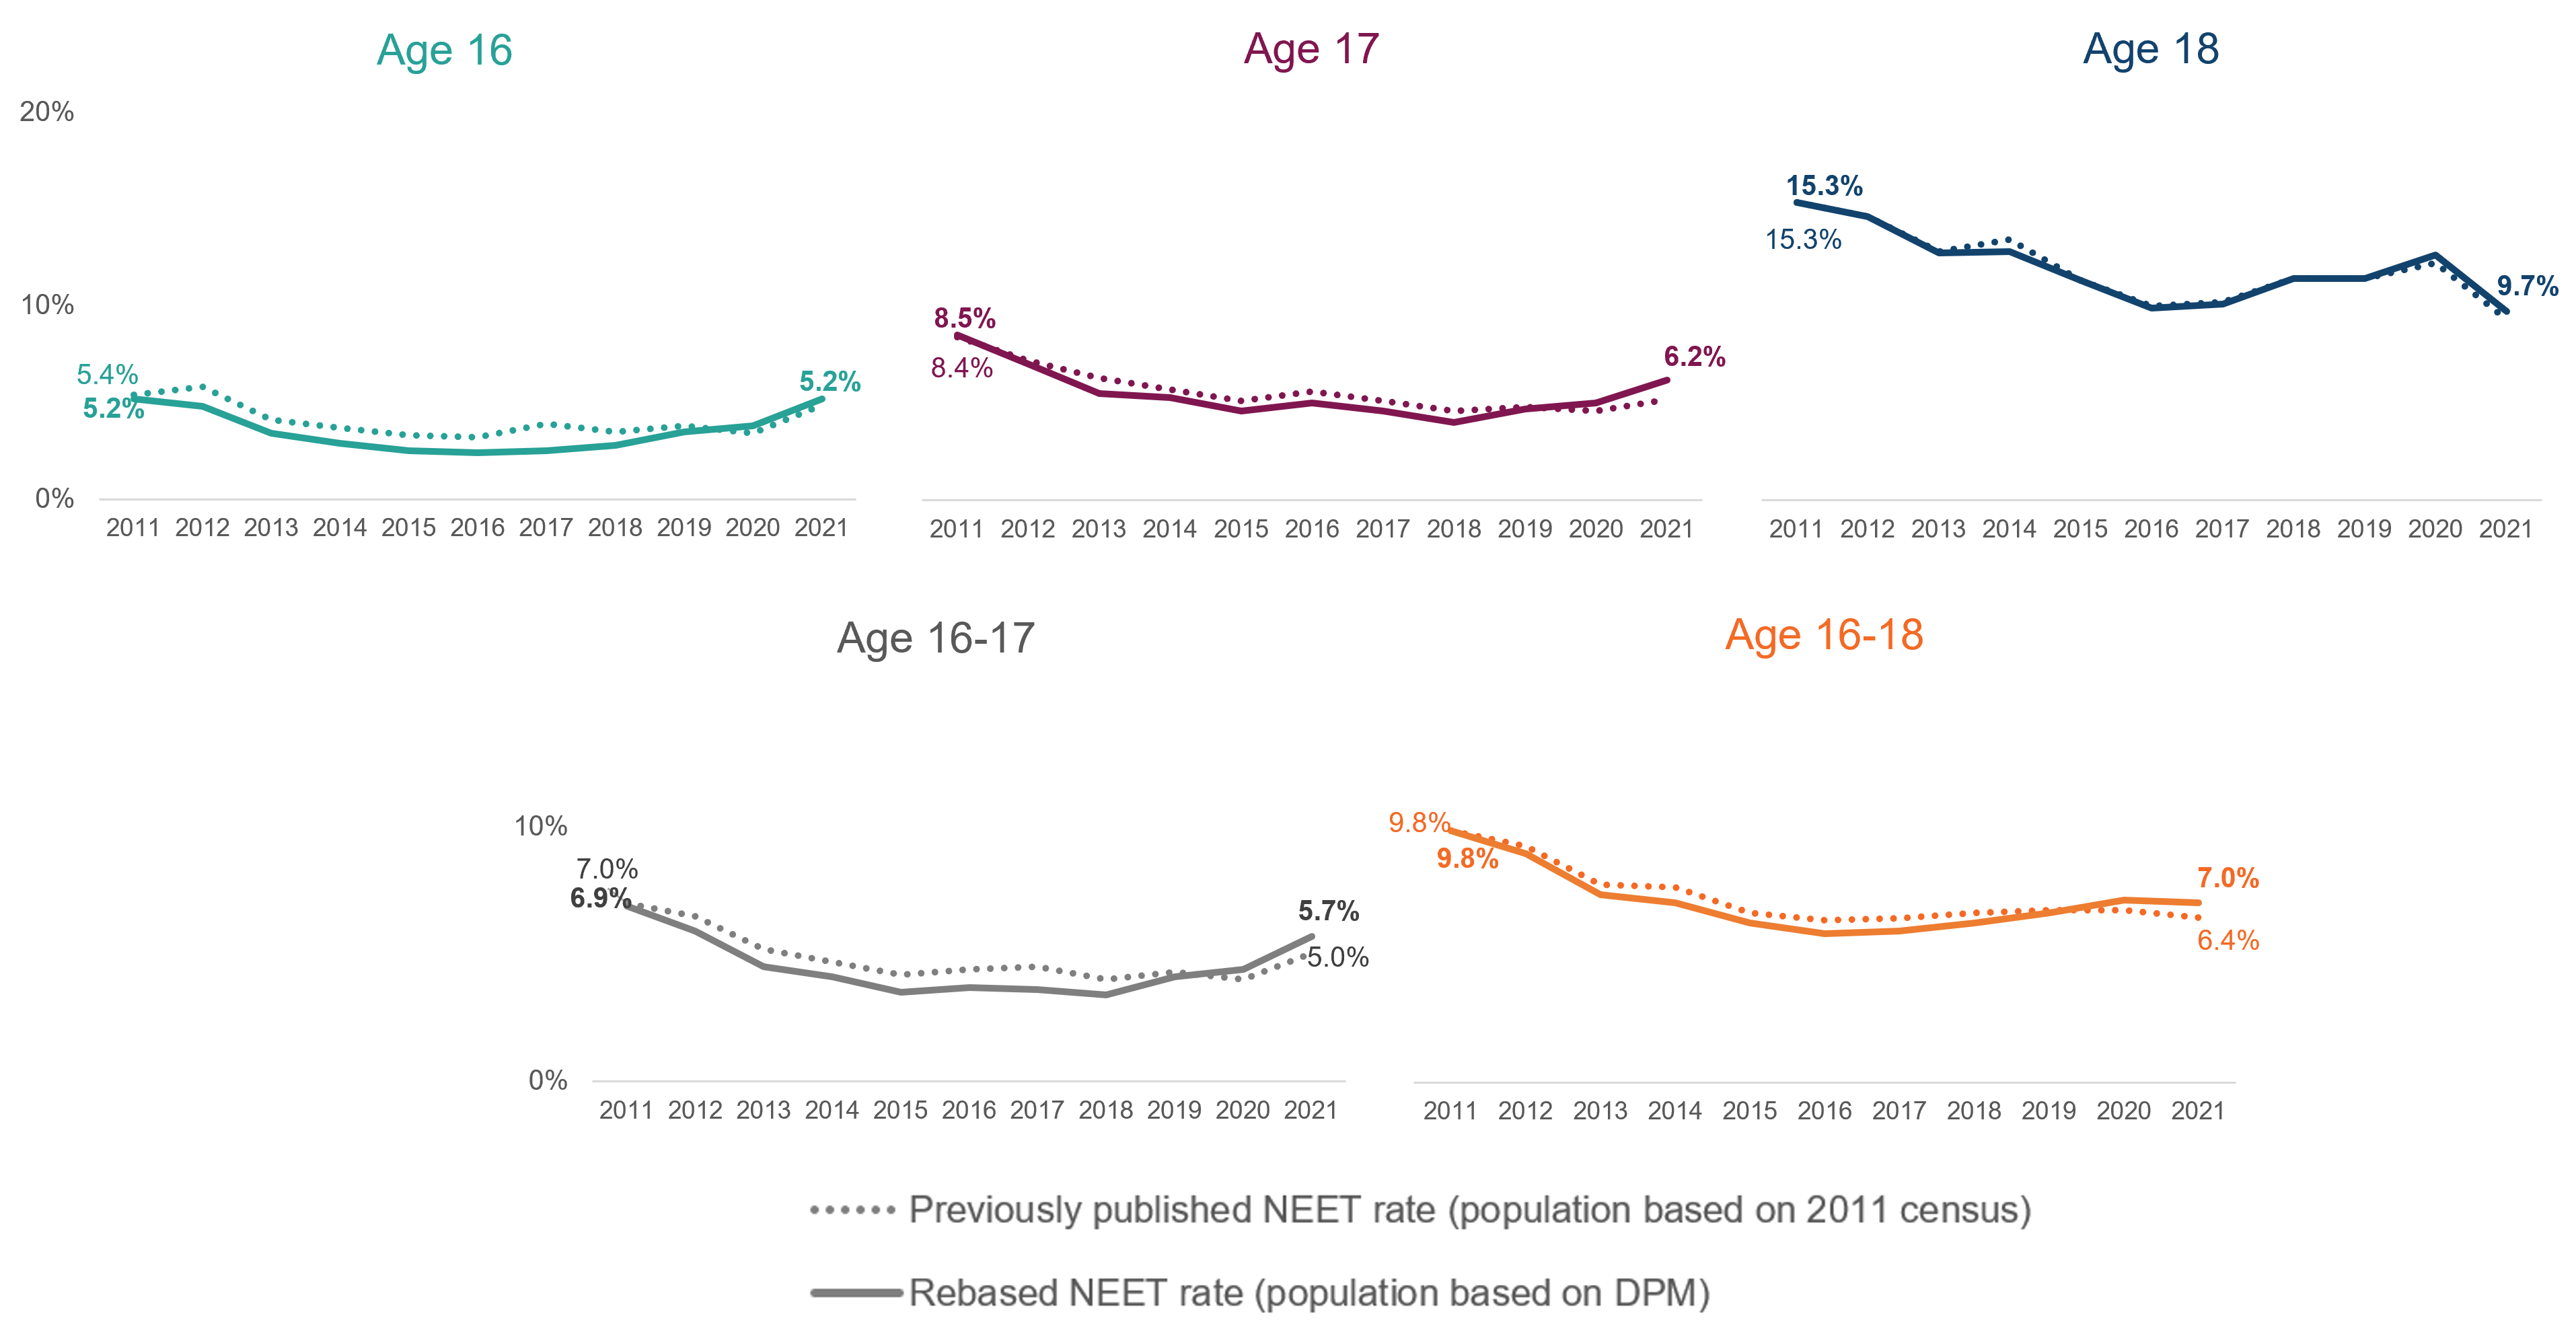 Comparisons of previously published NEET rate against the new rebased rate 2011-2021 for ages 16,17,18,16-17 and 16-18. The general trend at all ages was previously an over estimation of NEET up to 2019 and an slight under estimation in 2020 and 2021.